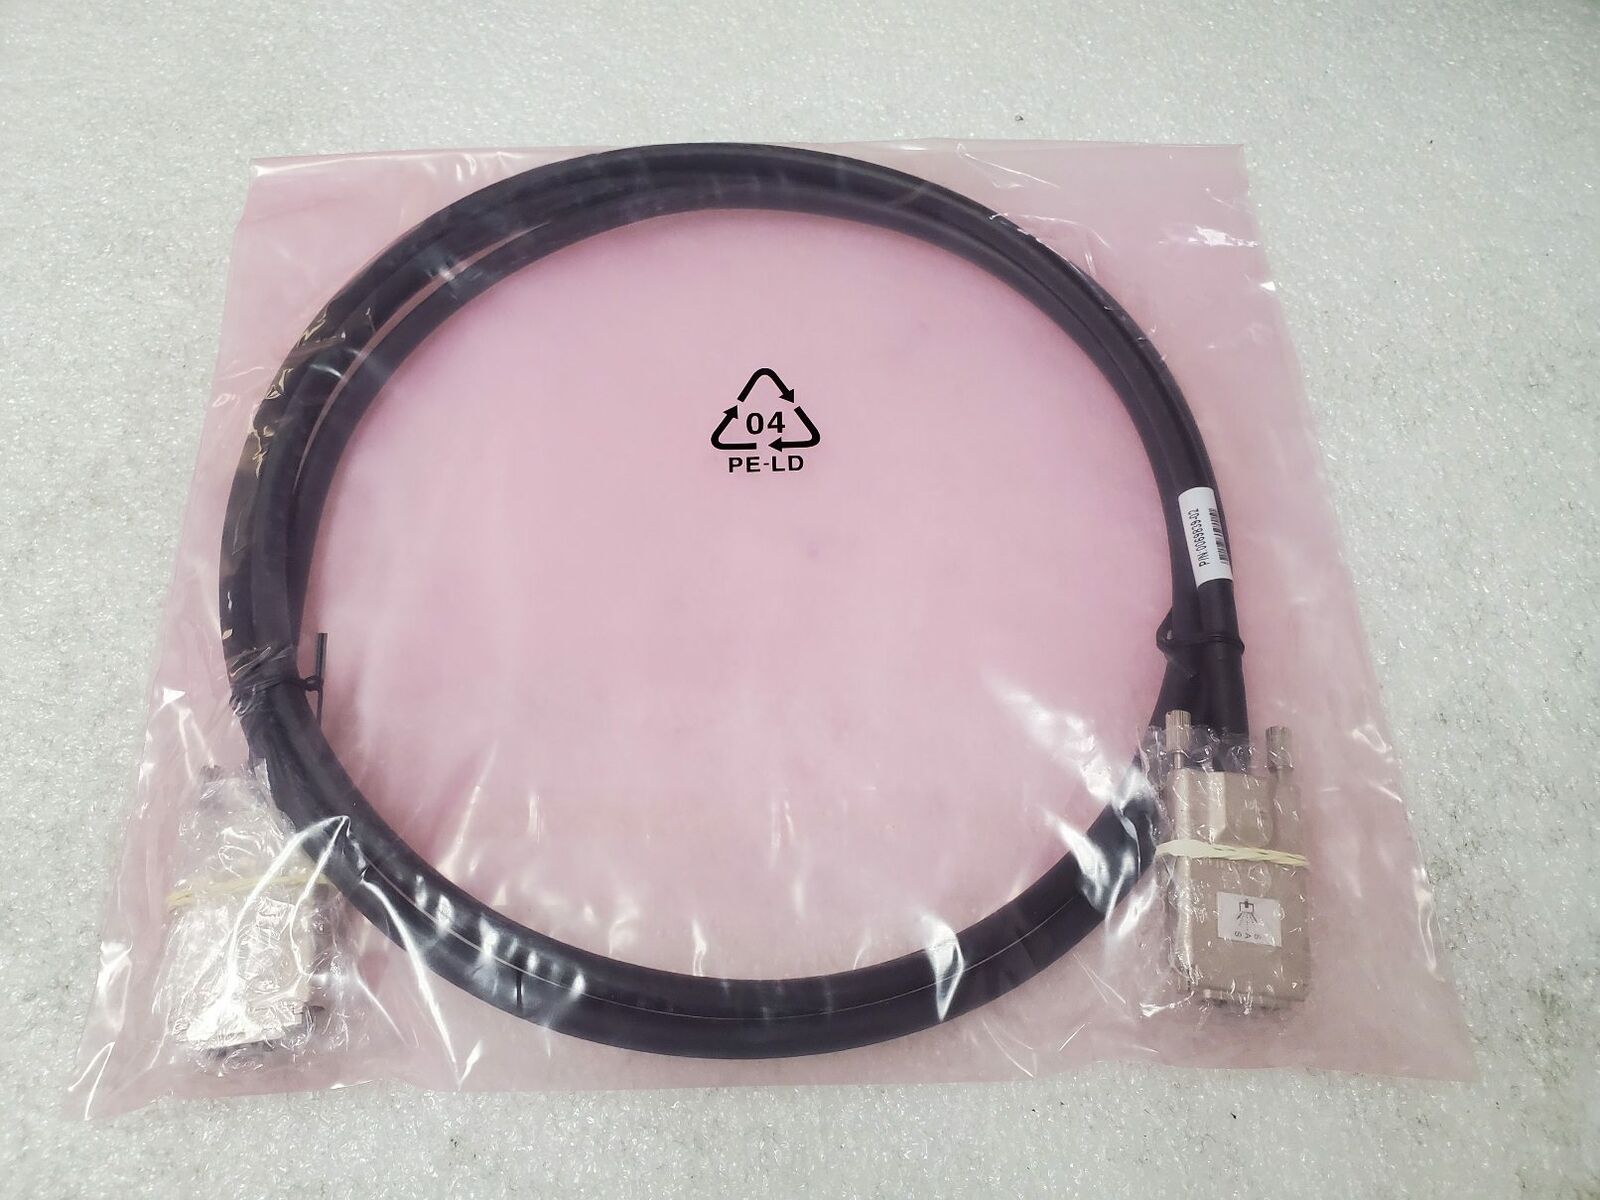 New FOXCONN 2M Dual SAS SFF-8470 Infiniband External Connection Cable Z9 - 00...